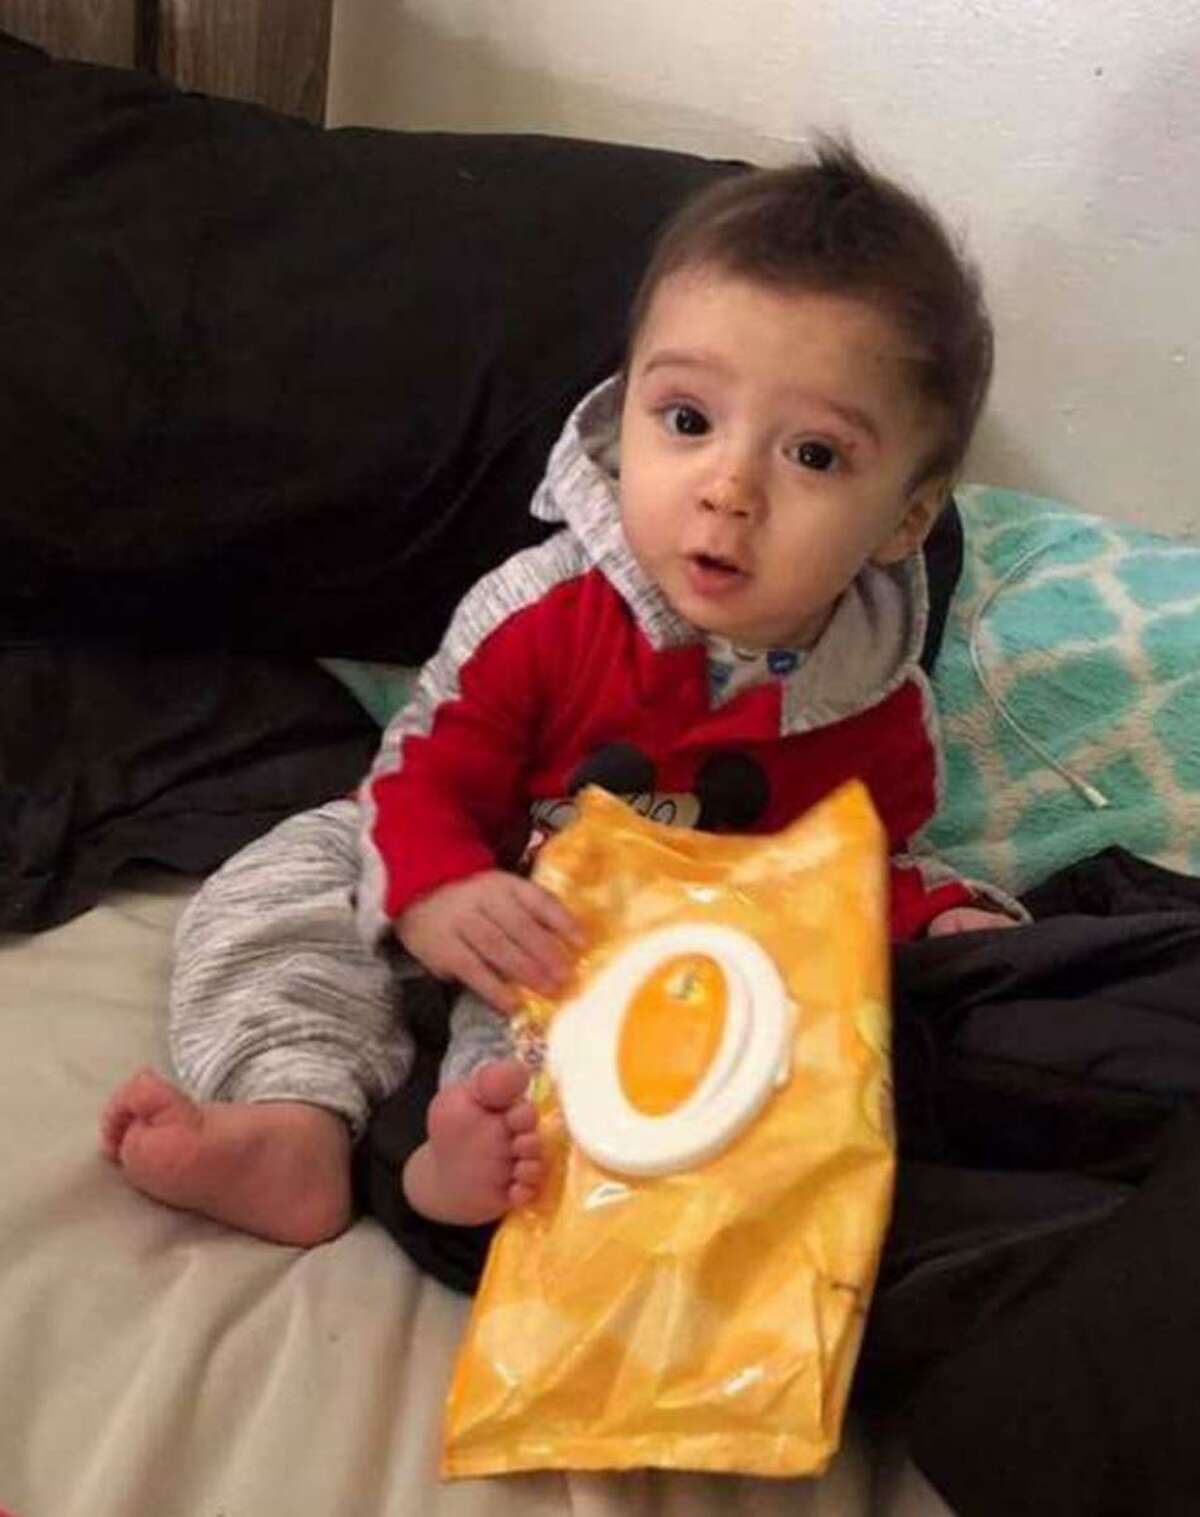 King Jay Davila, who is 8 months old, was reported missing by his father about 7 p.m. Jan. 4, 2019, from a gas station in the 300 block of Enrique Barrera Parkway.